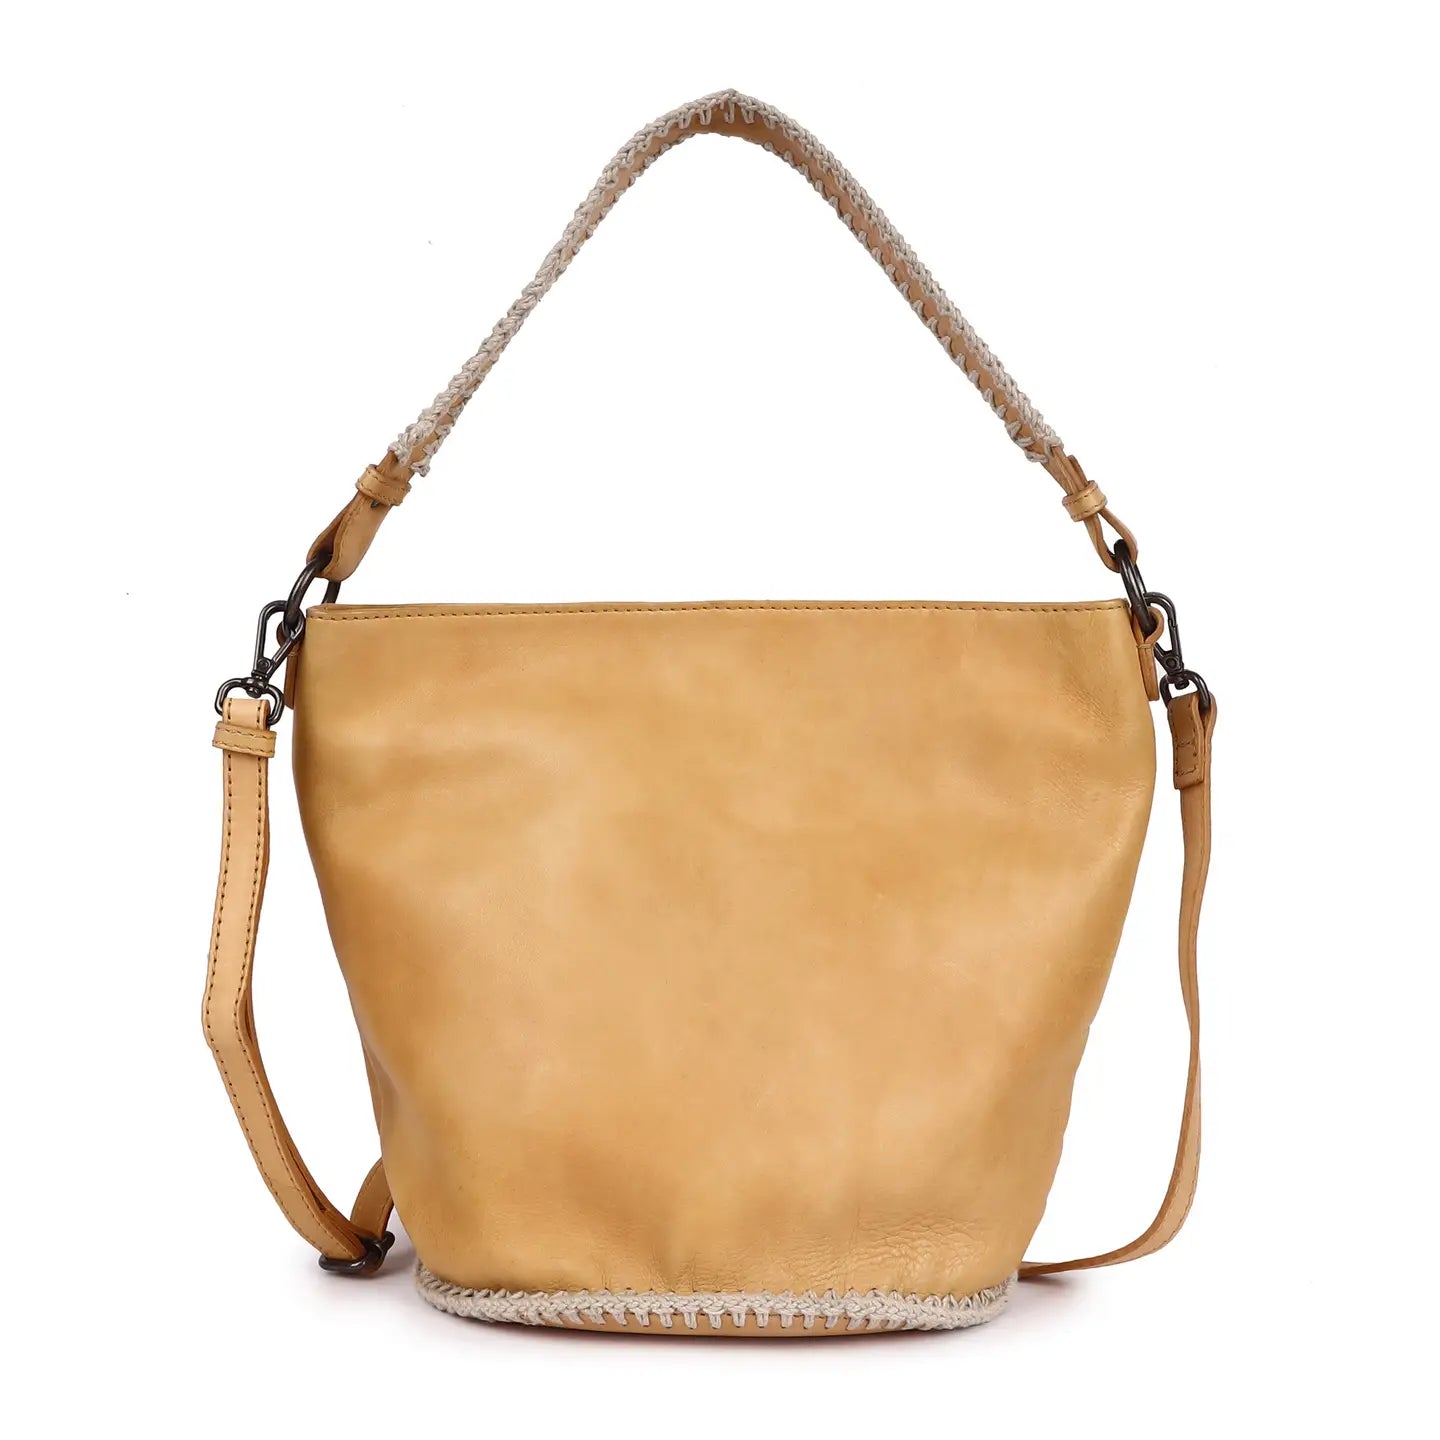 Latico Leather Patsy Handcrafted Leather Shoulder Bag/Crossbody